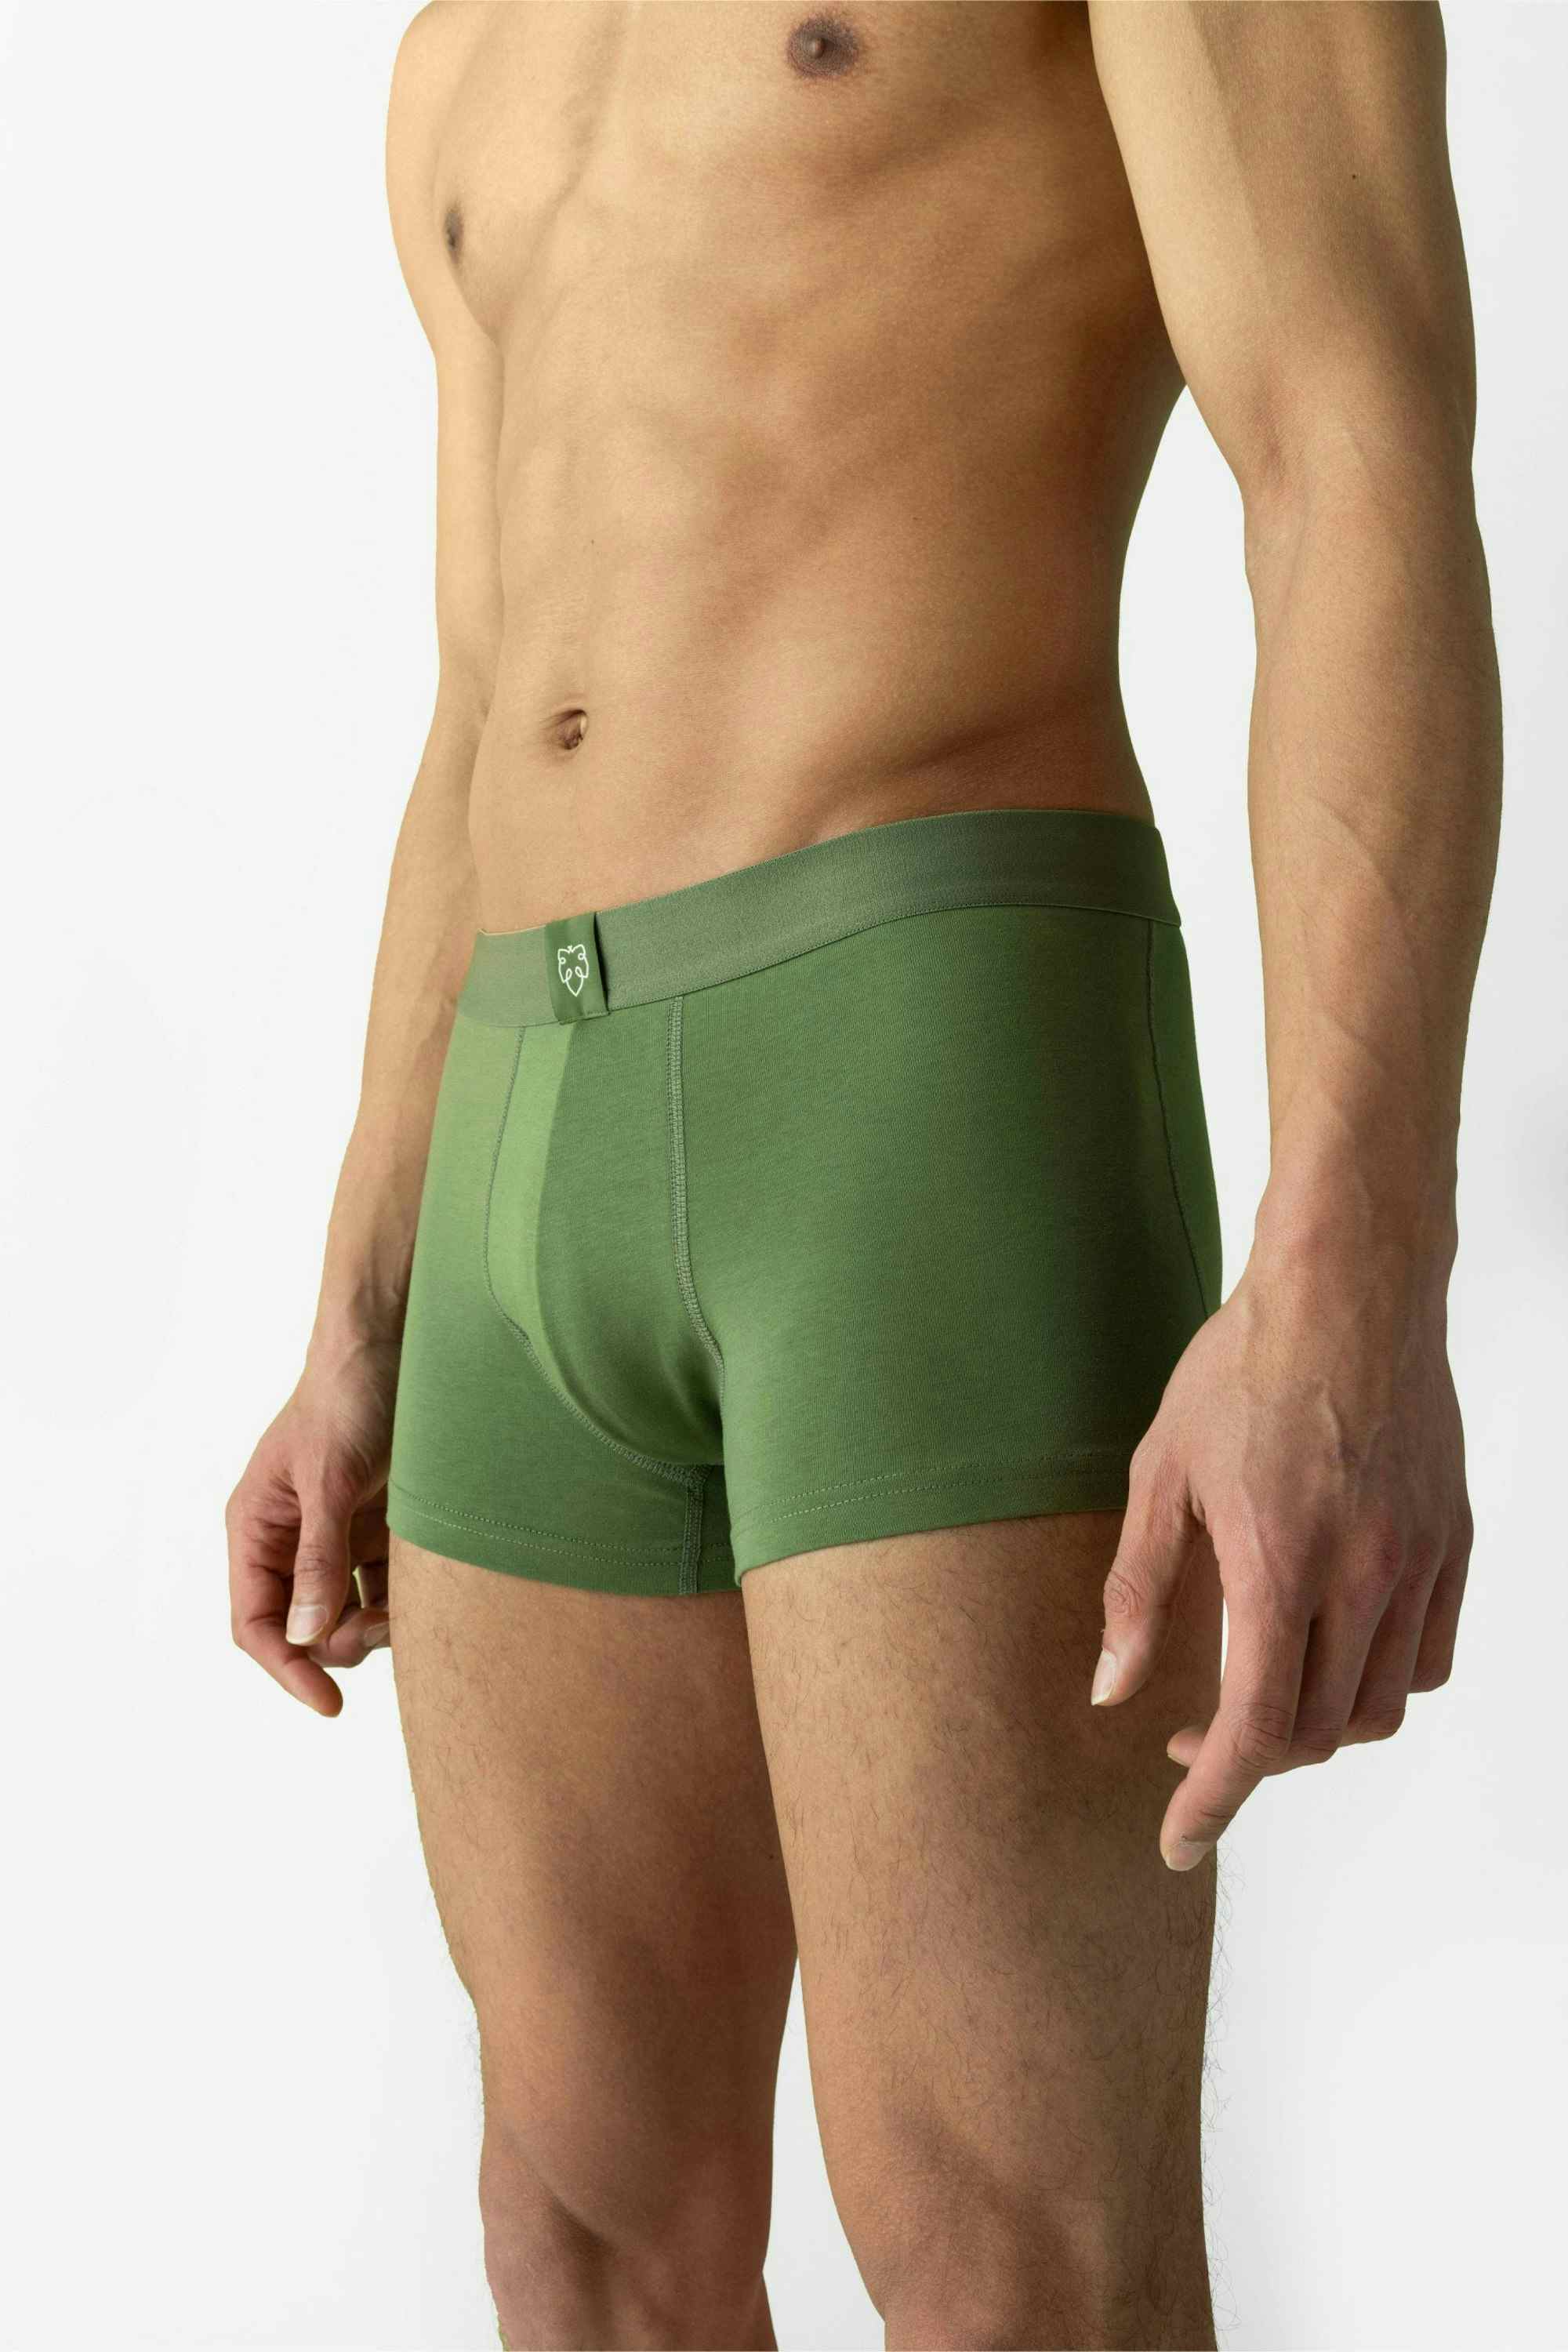 Solid Green Trunk